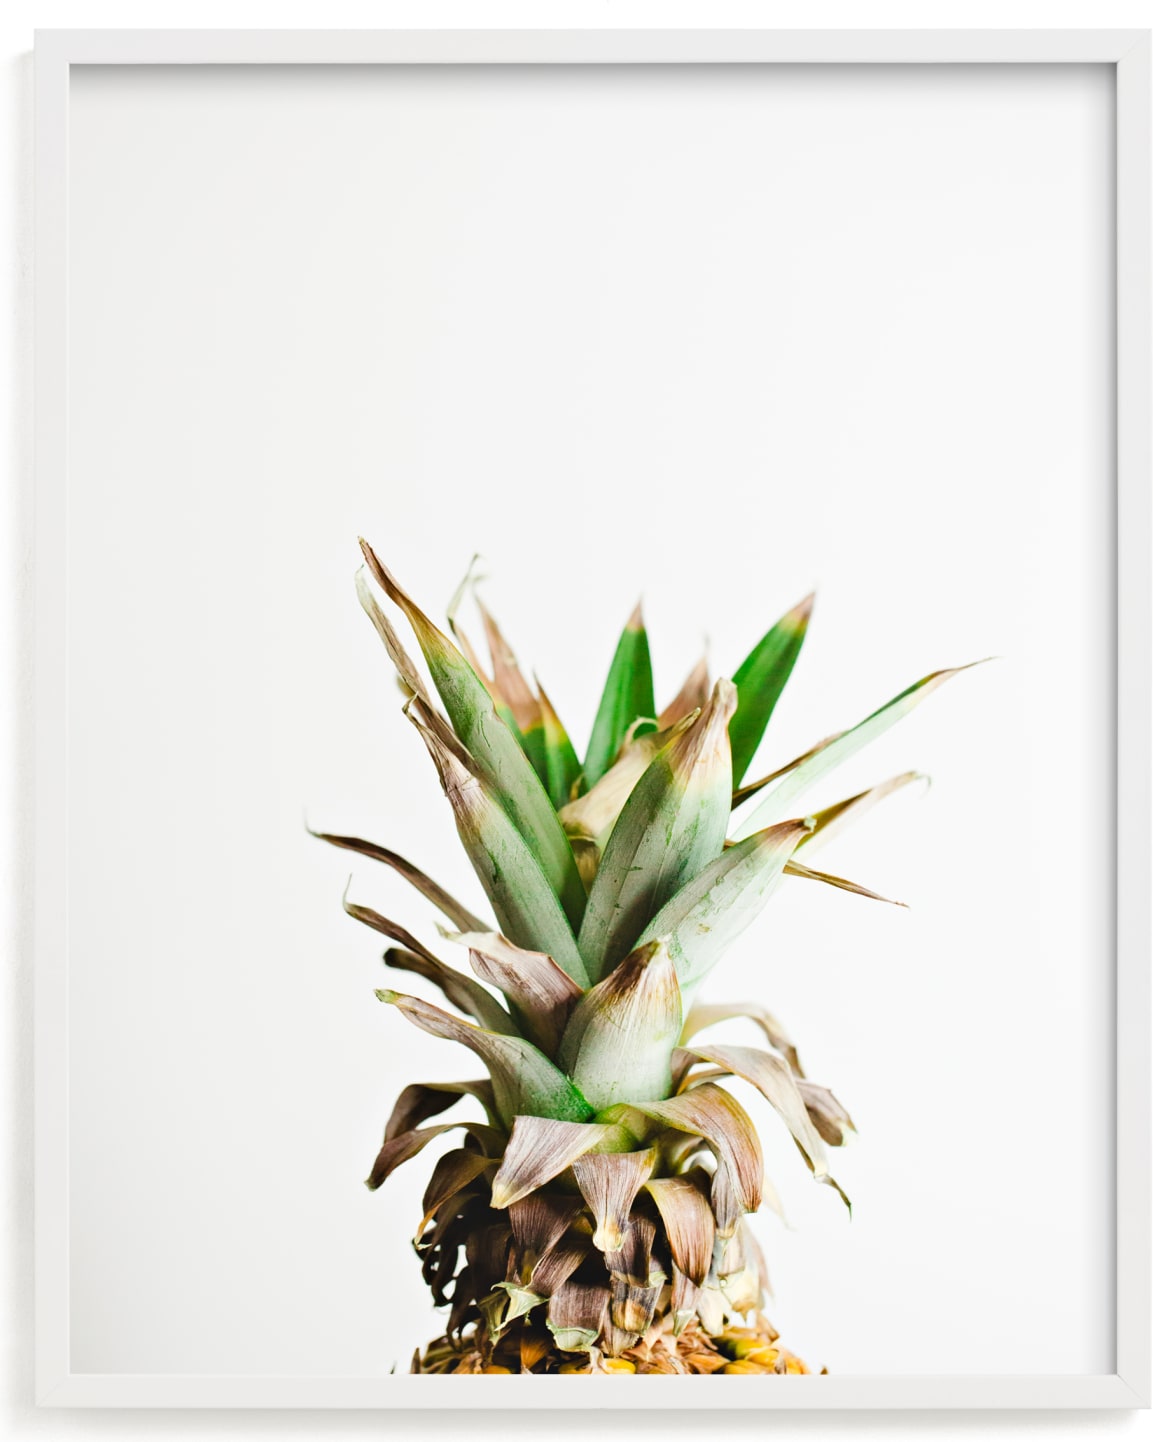 This is a white art by Joni Tyrrell called Pining for Pineapple.